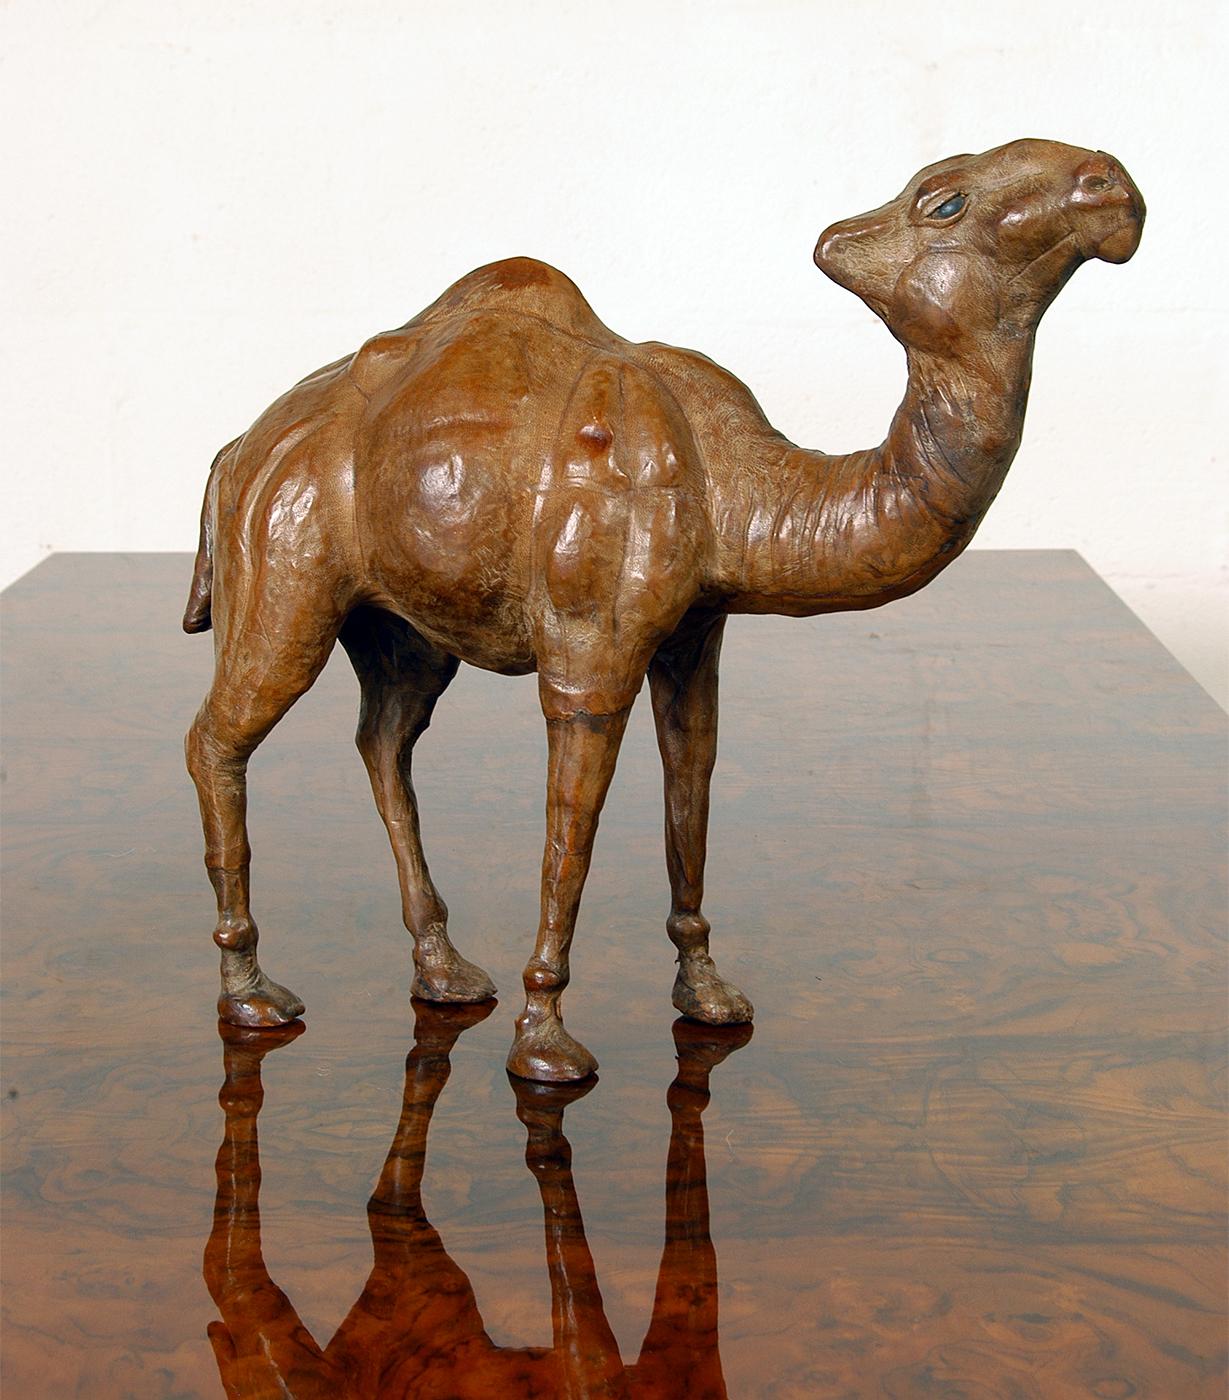 Hand-Crafted 20th Century Middle Eastern Decorative Vintage Leather Camel Figurine